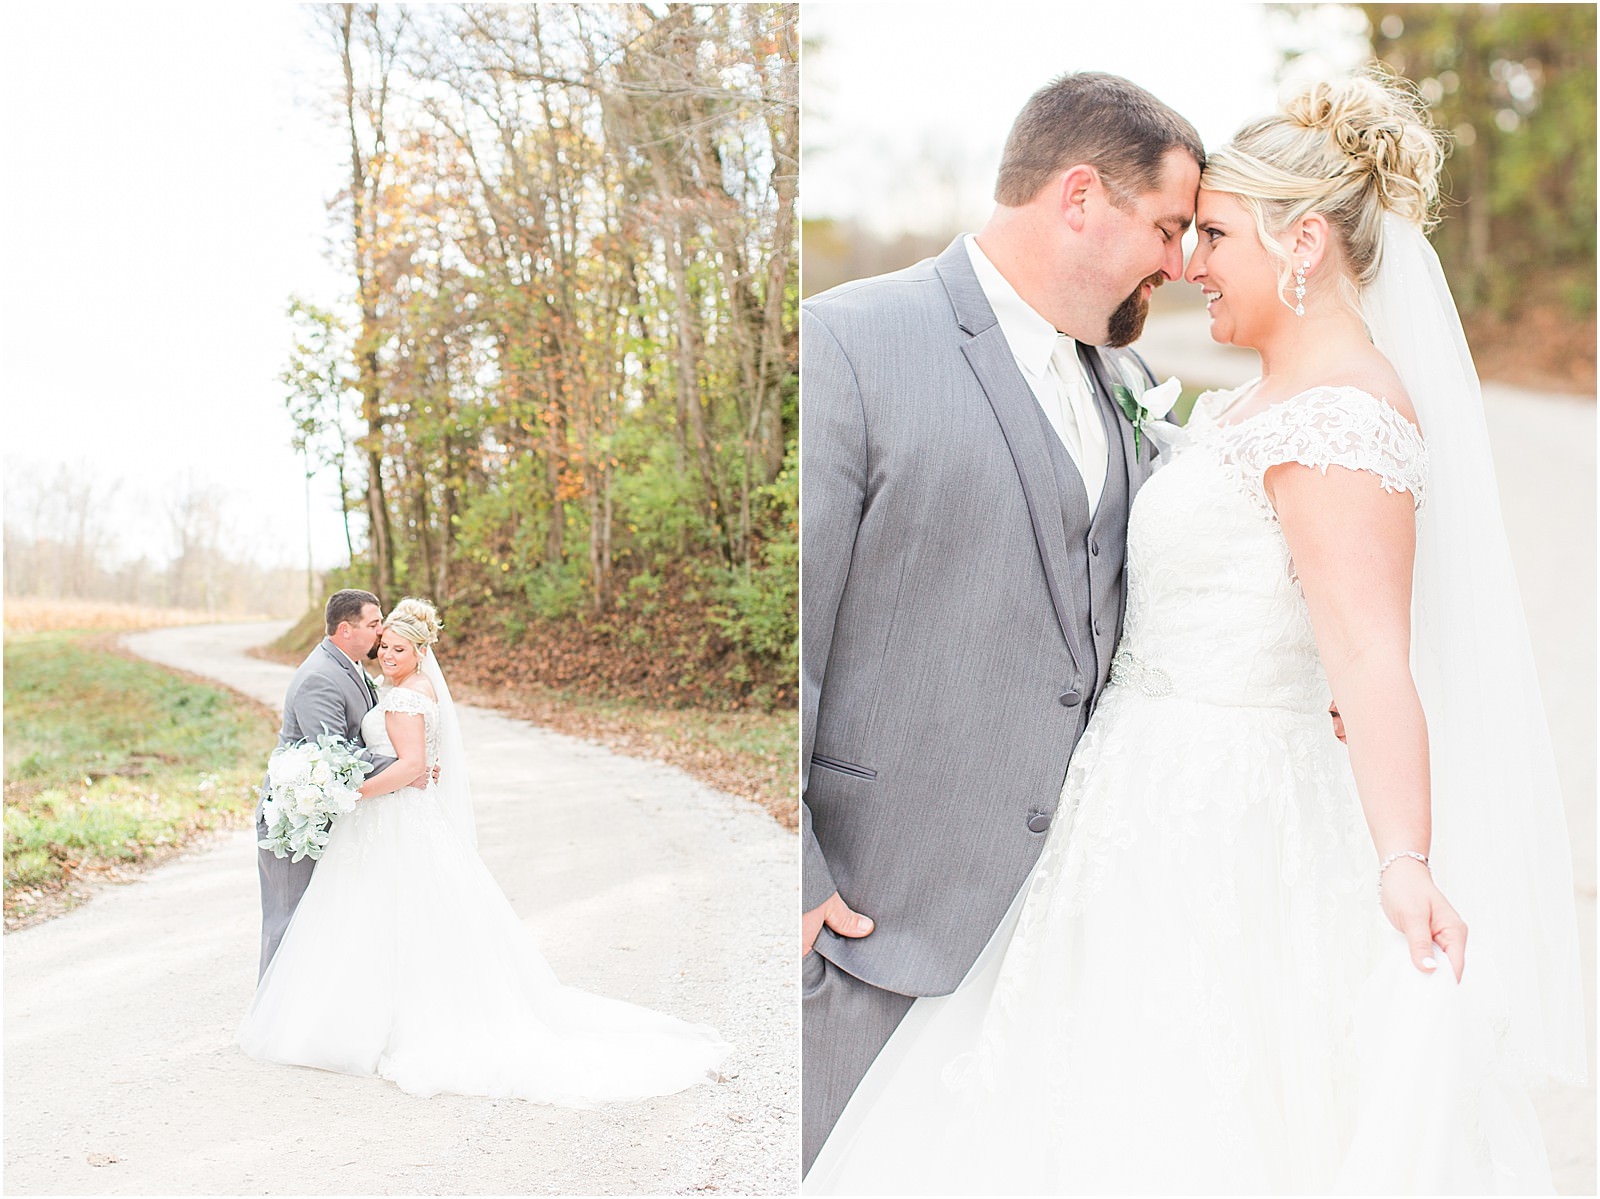 A Navy and Blush Wedding in Tell City Indiana | Brianna and Matt | Bret and Brandie Photography 0126.jpg